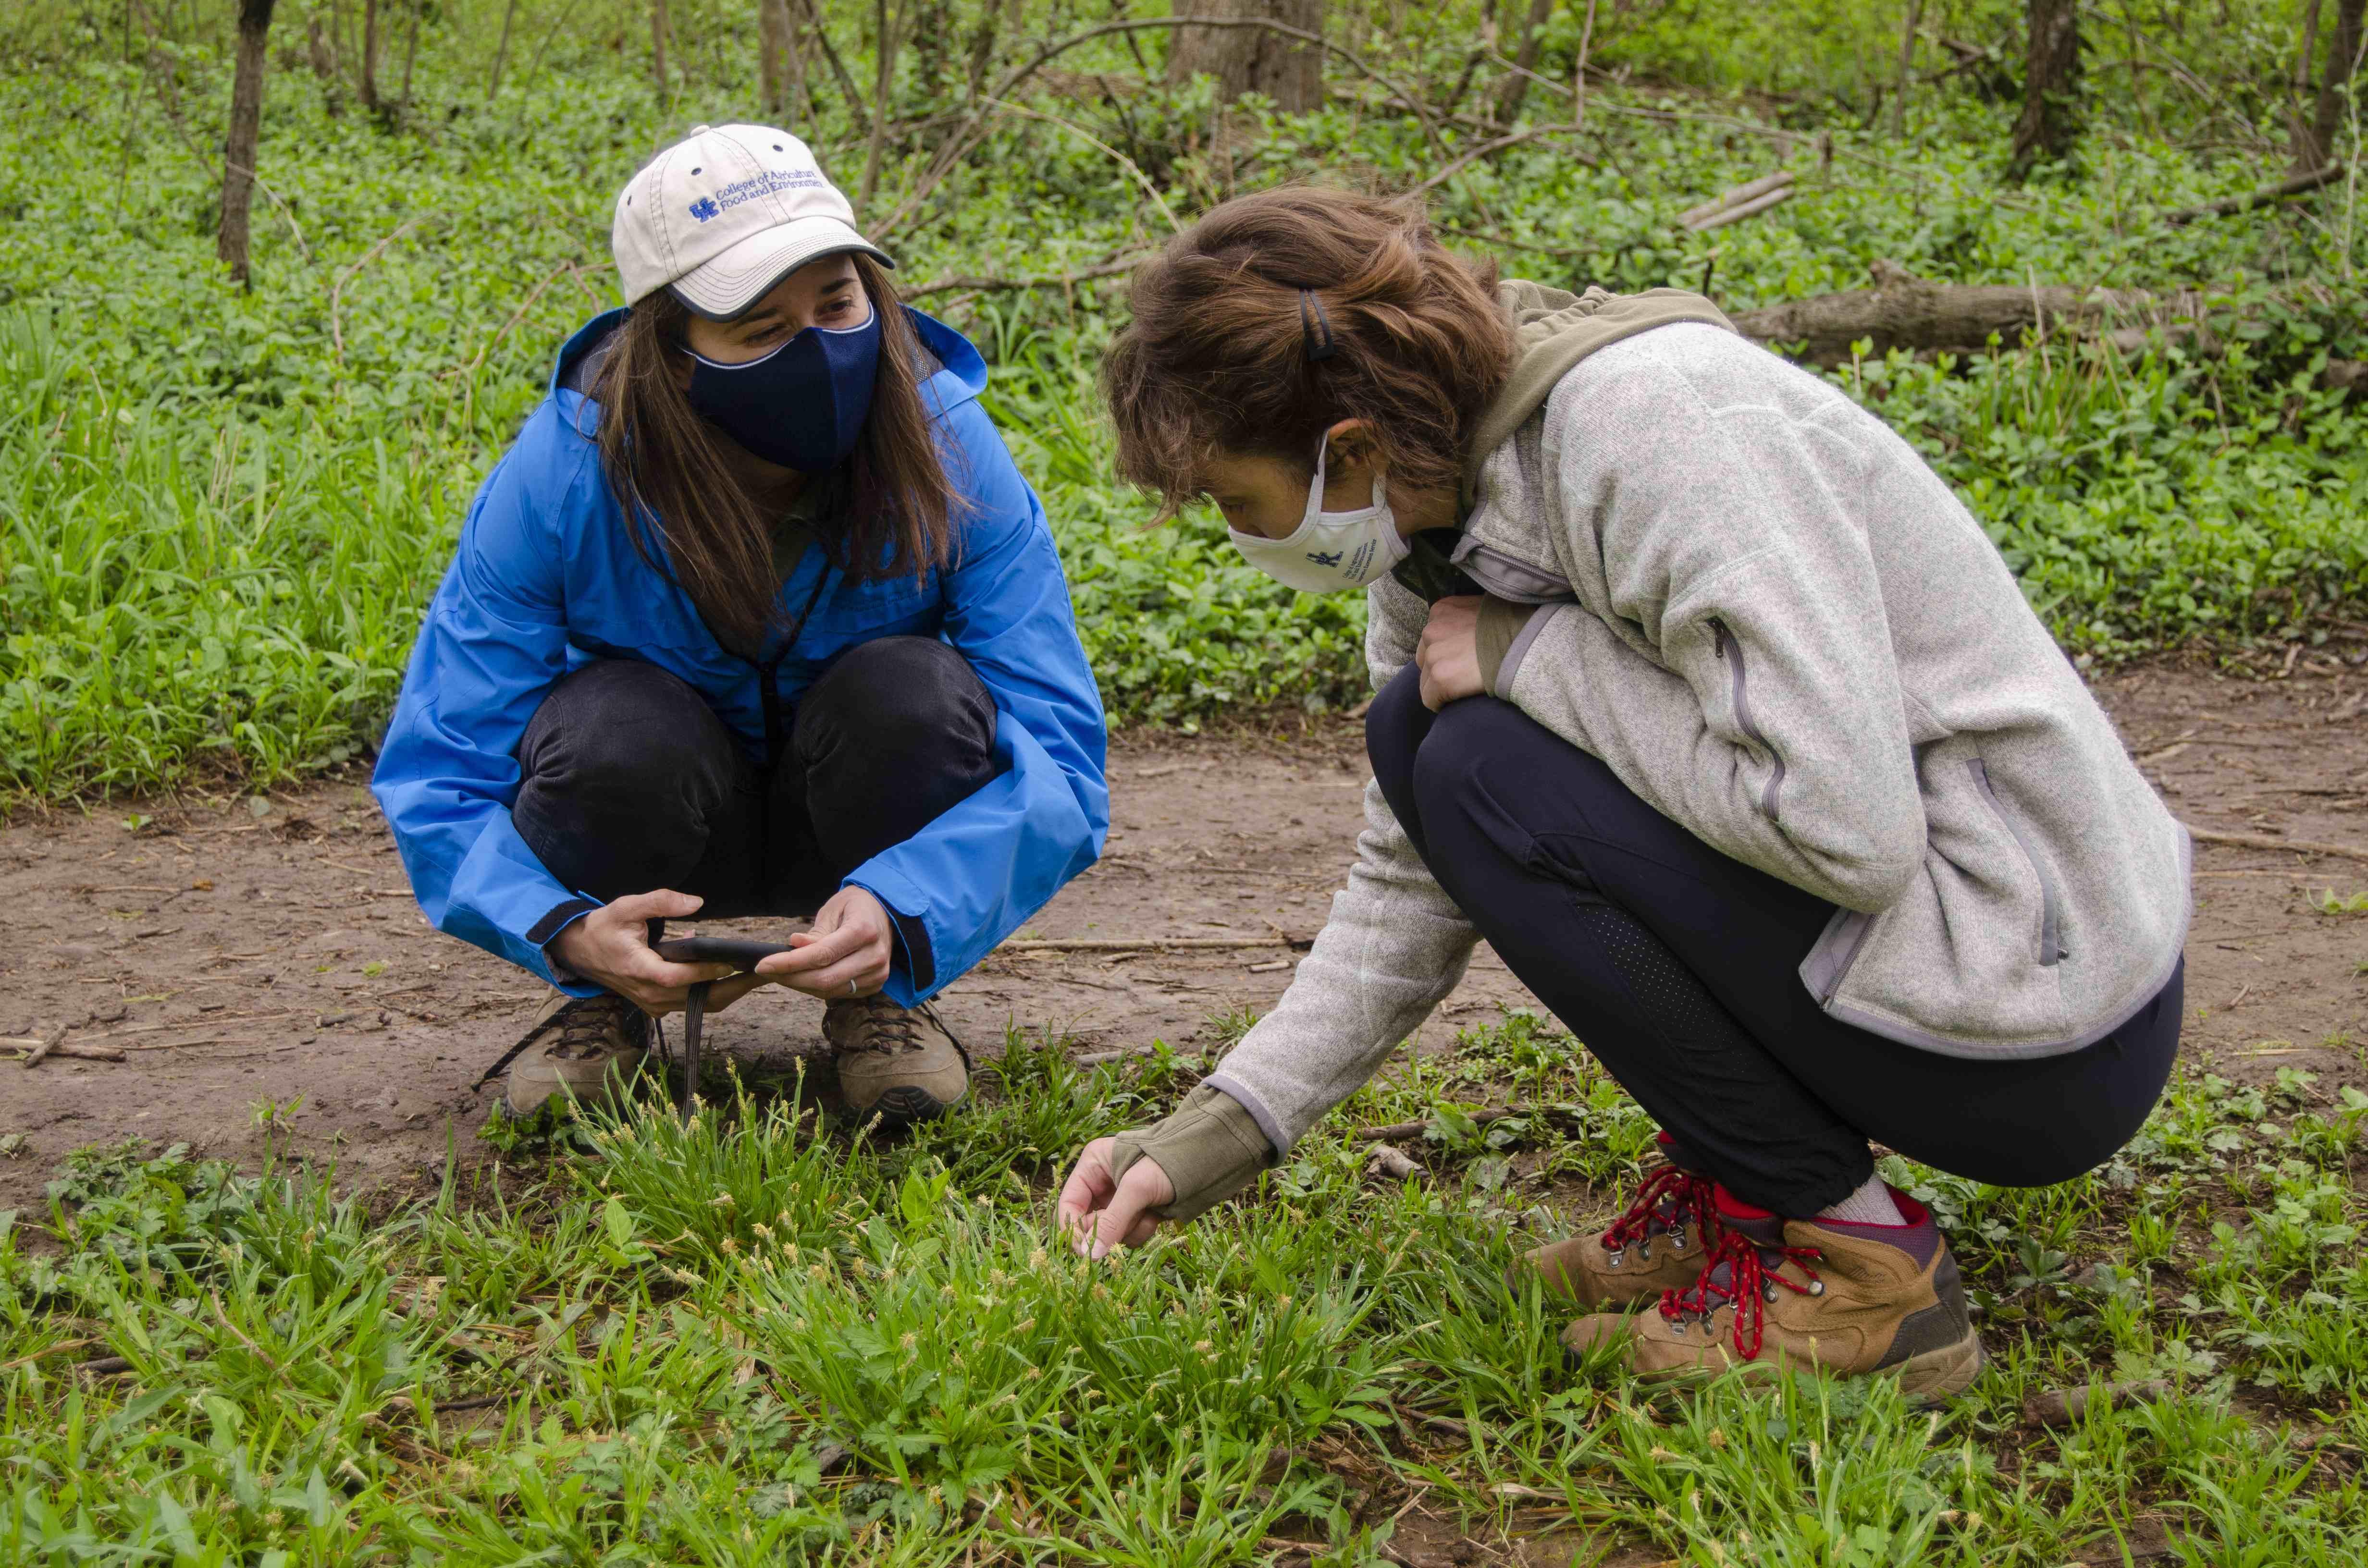 Students learn about their local environment in the Master Naturalist Program.